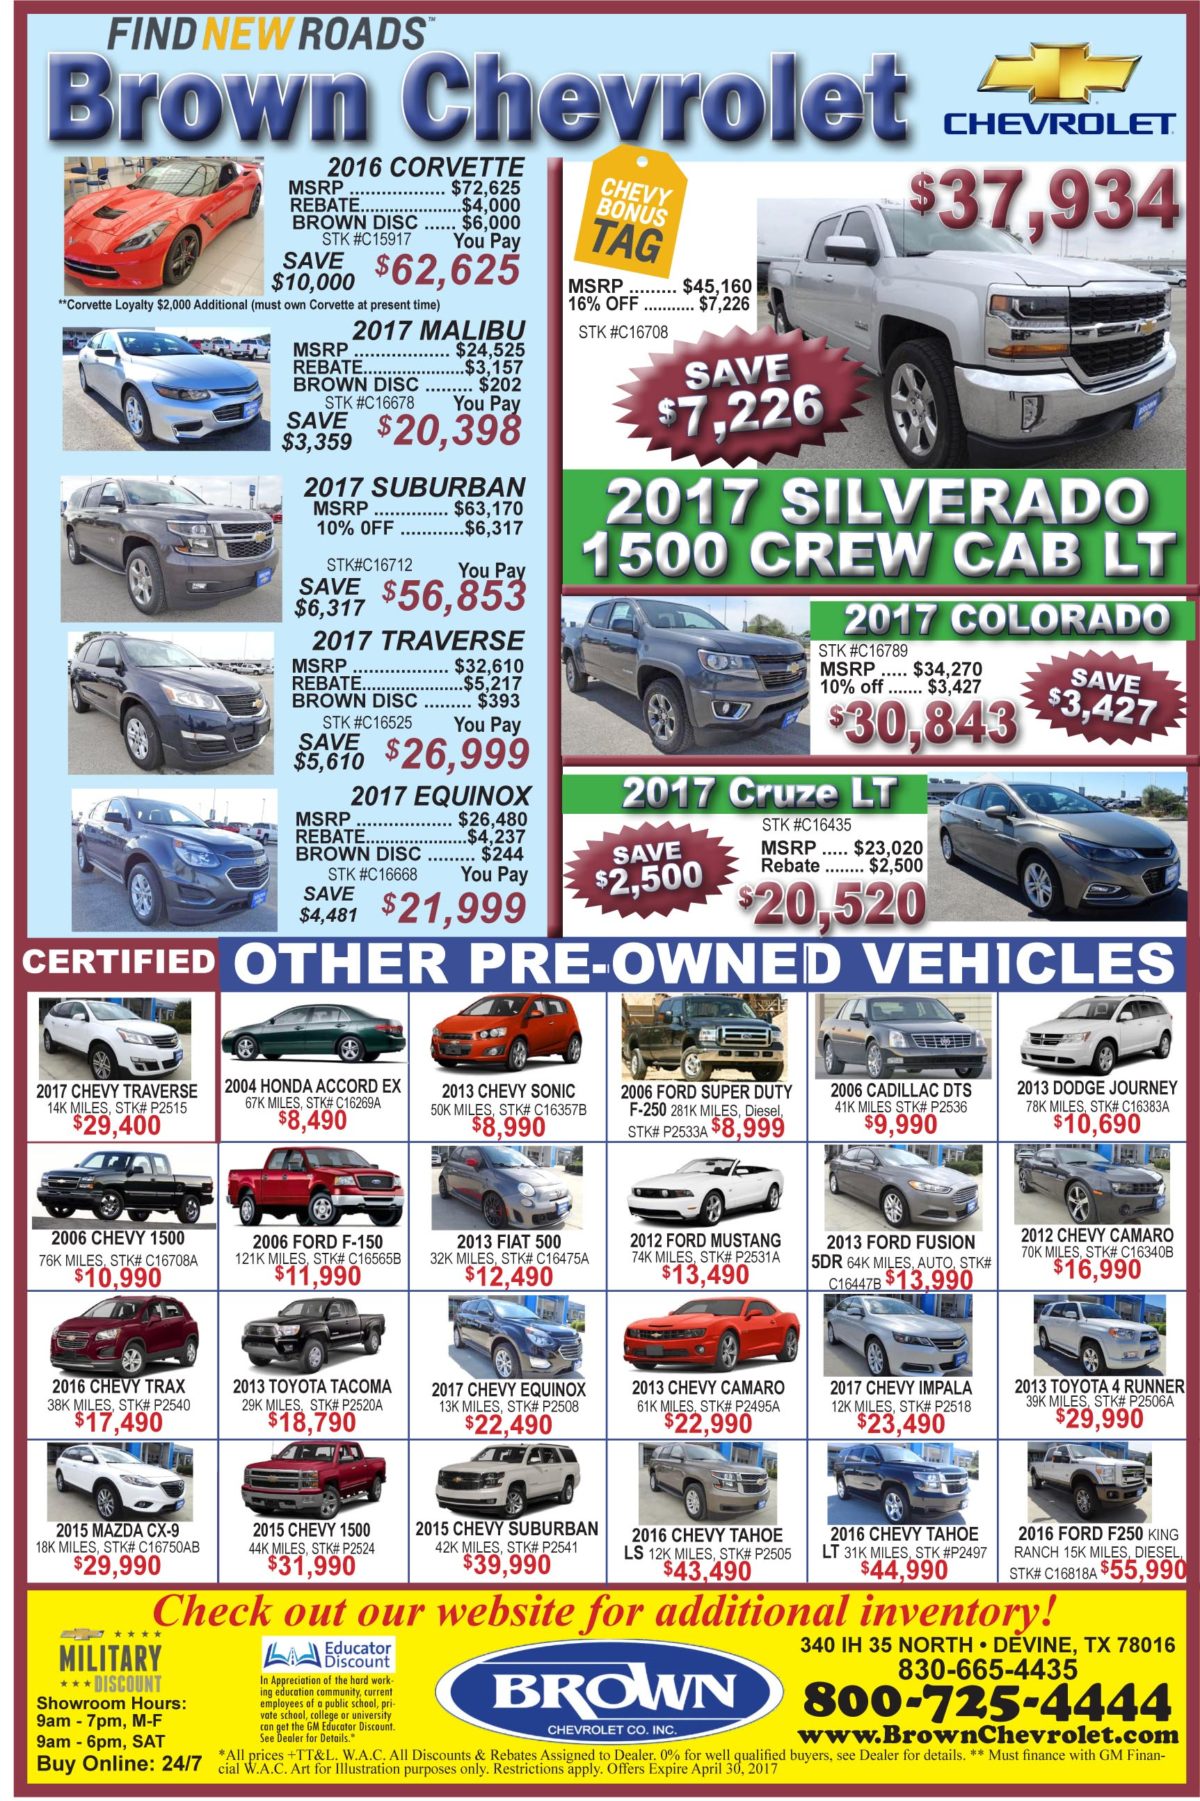 Brown Chevrolet deals for the week of 4-26-17